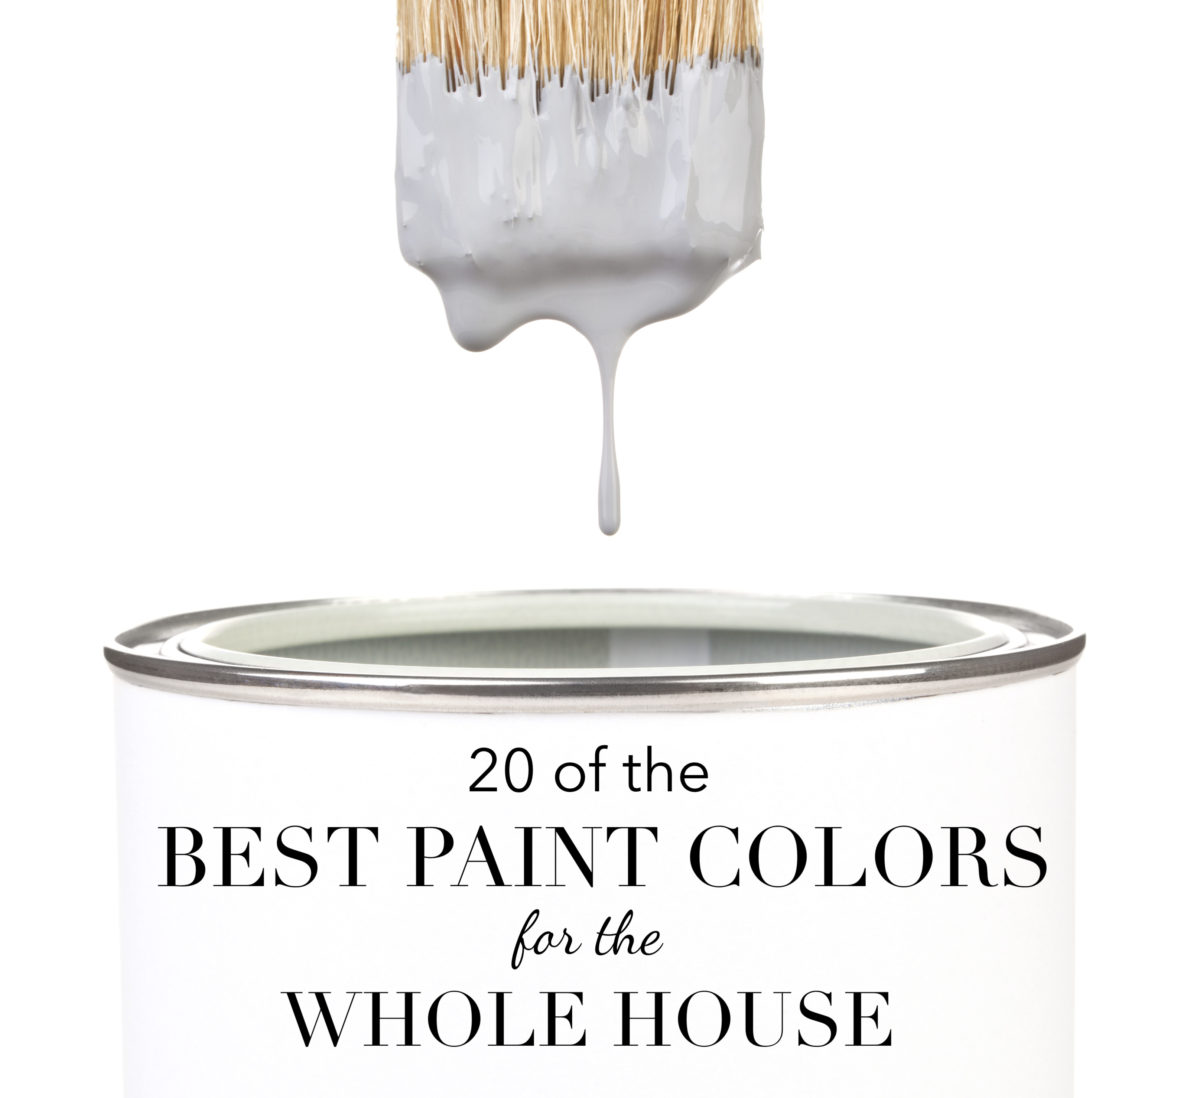 painting whole house one color